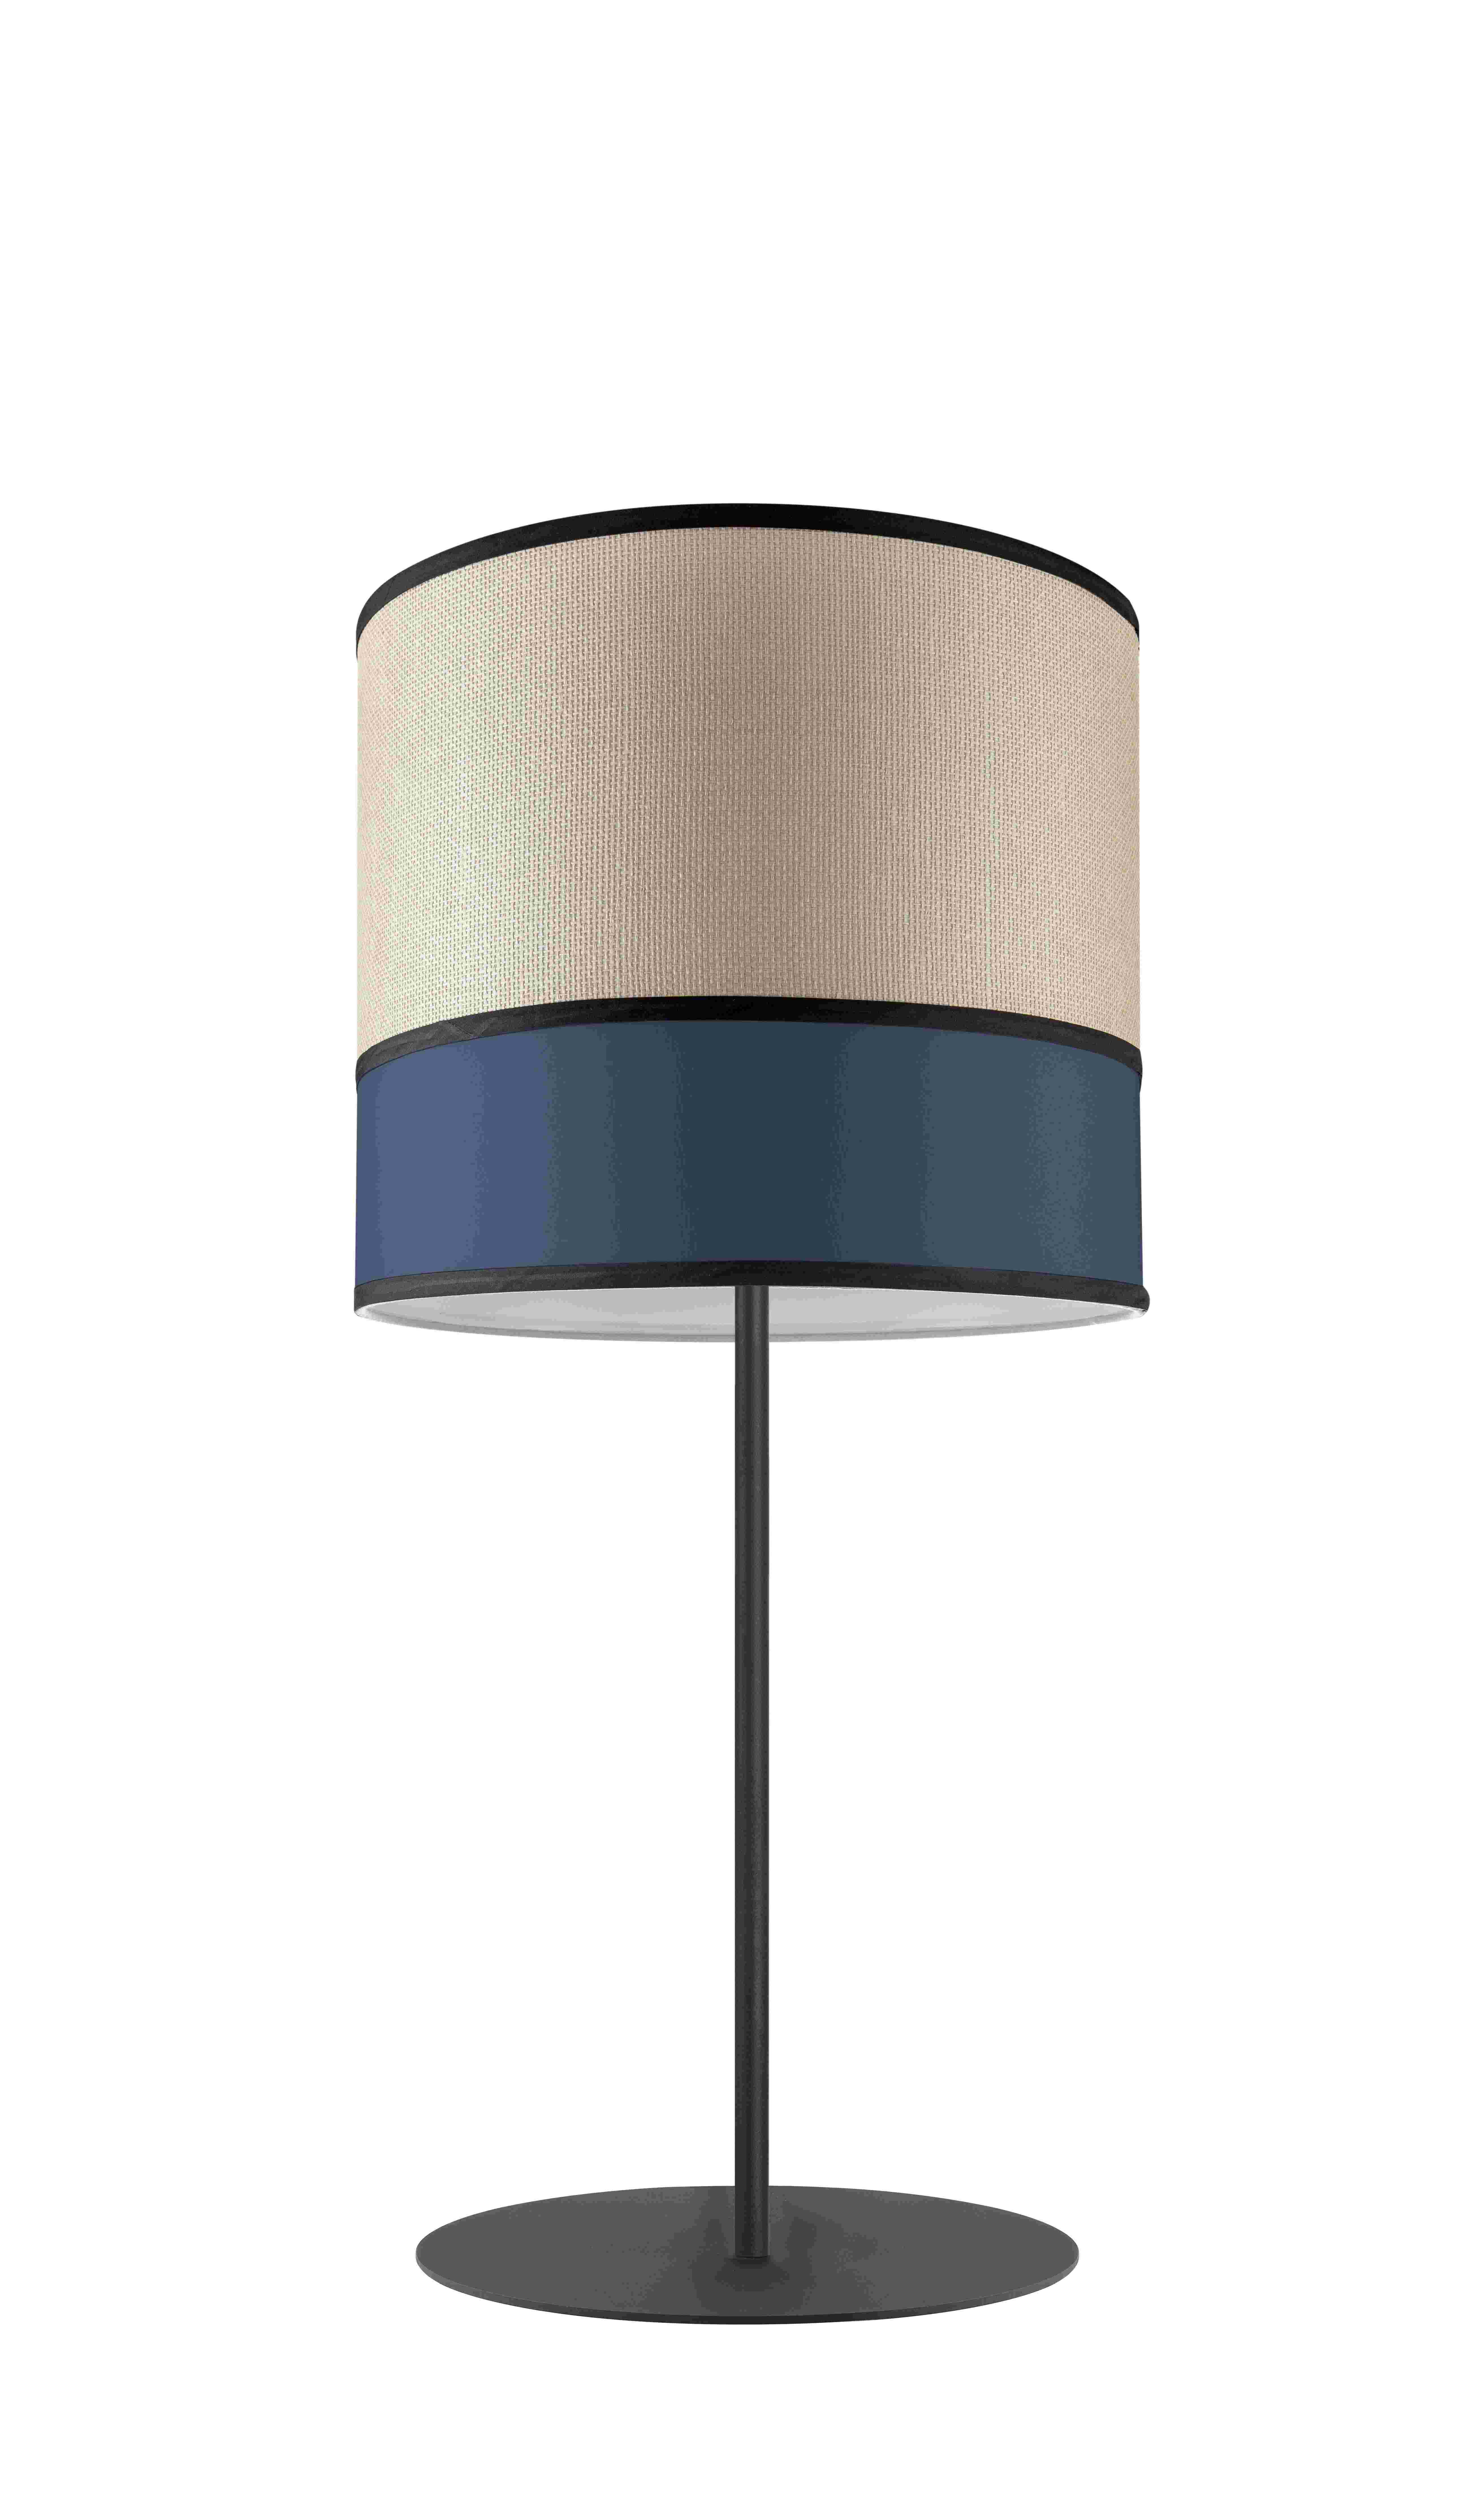 Tangla lighting - TLT7041-25BL - LED table lamp 1 Light - metal and paper and TC fabric in blue - bright - E27